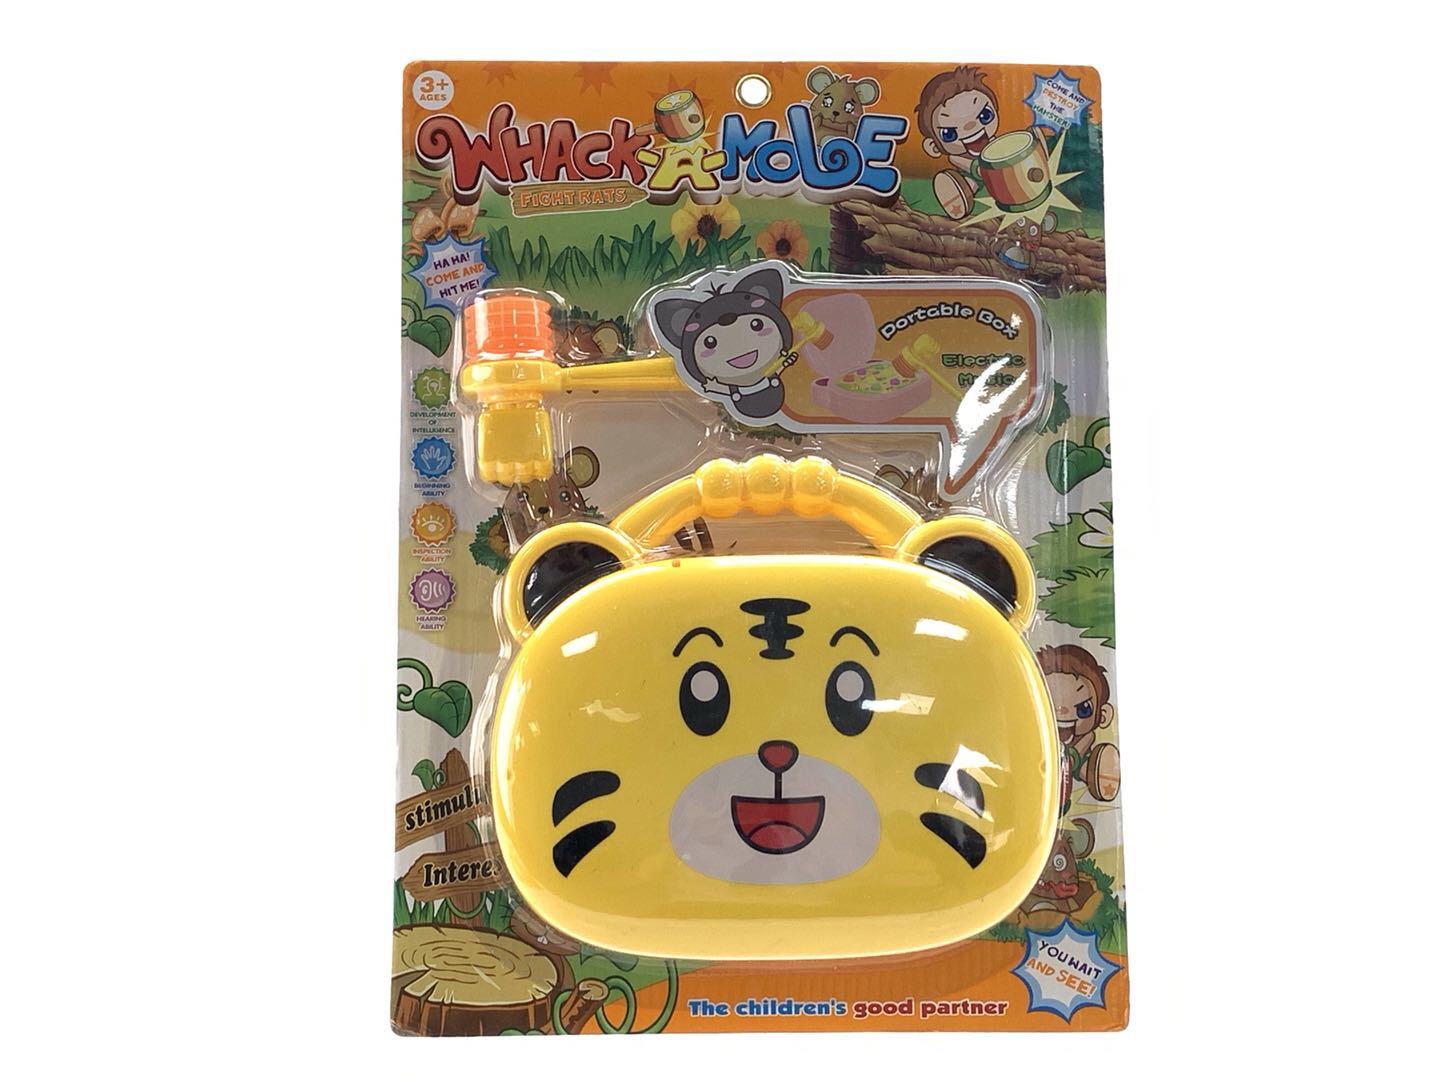 Electric music portable tiger beating hamster